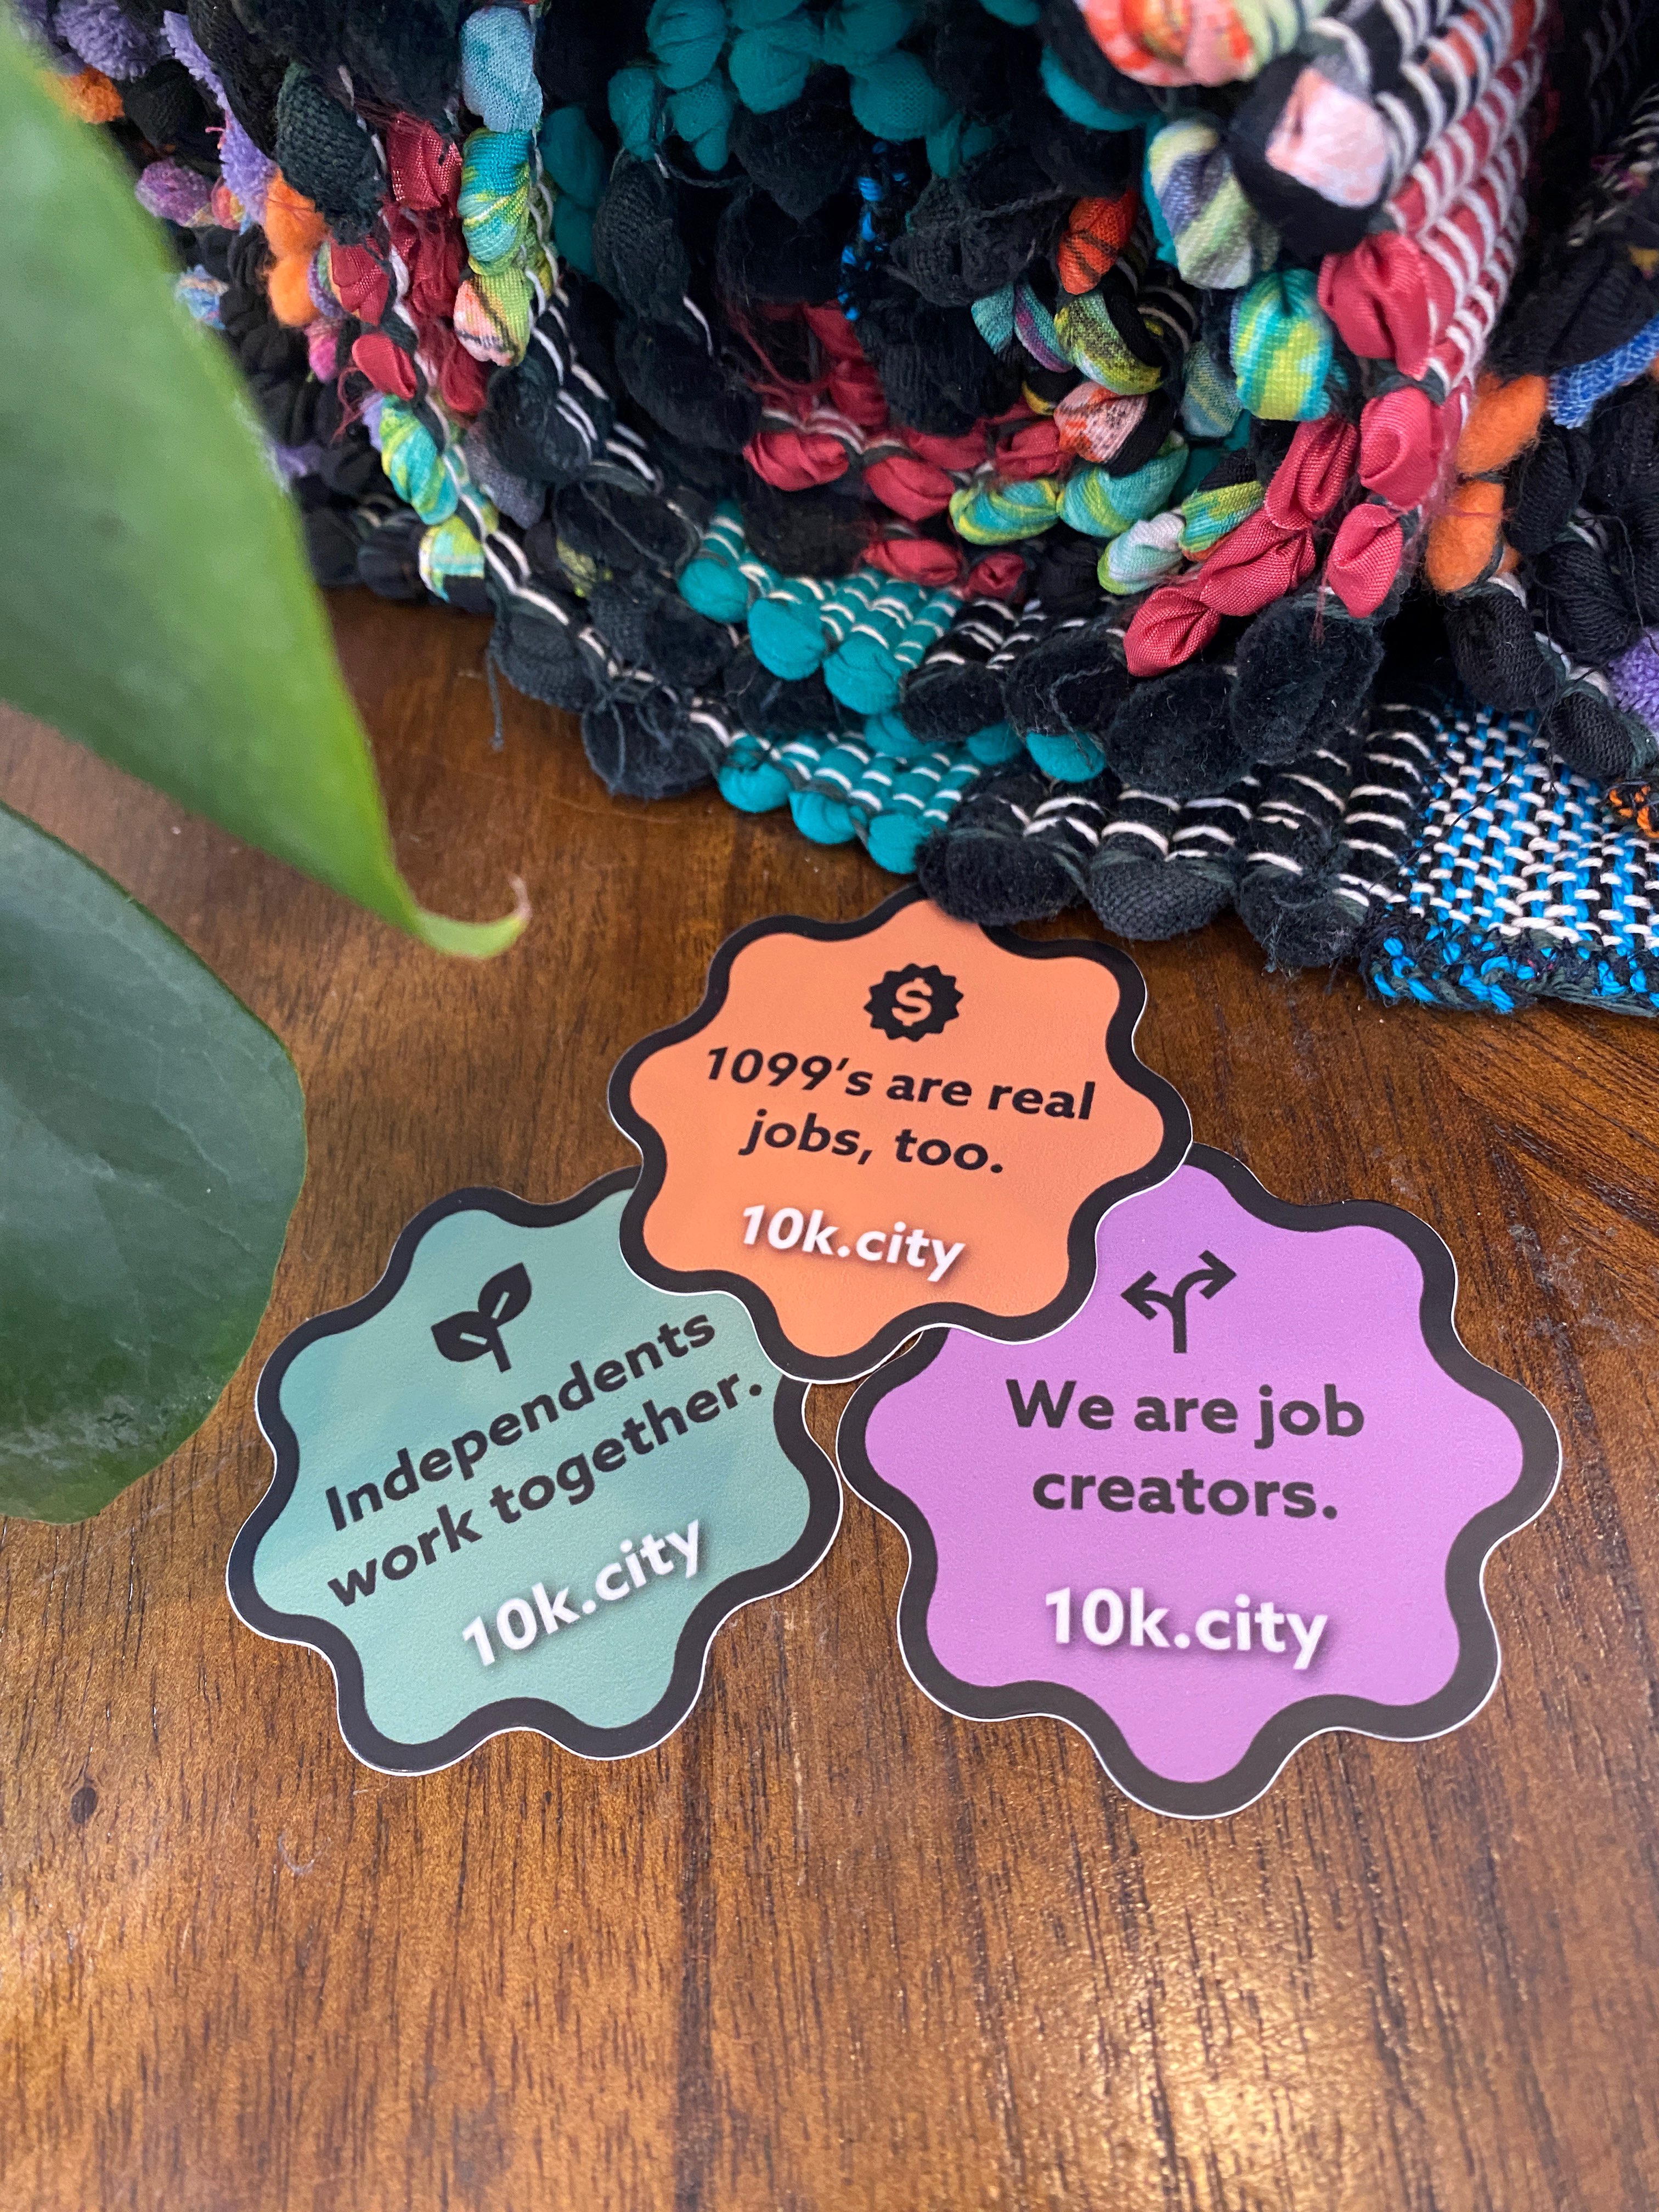 Stickers that say '1099 are real jobs too', 'Independents Work Togther', and 'We are job creators'